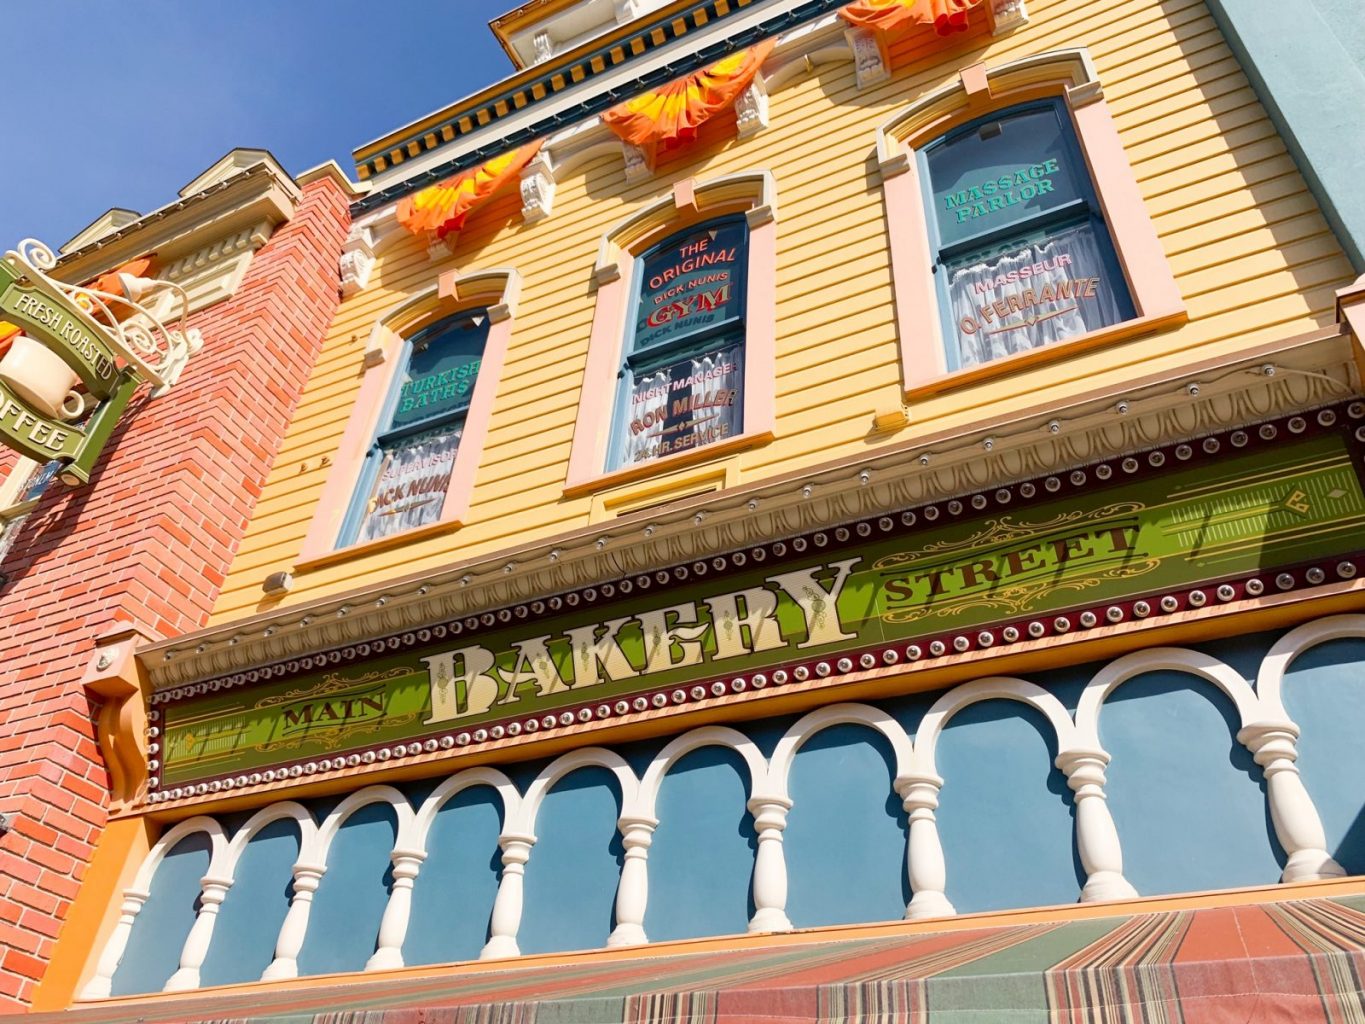 We see signage that reads, "Main Street Bakery" in delicate script against a green backdrop. Below it are intricate mini archways built into the siding of the store.